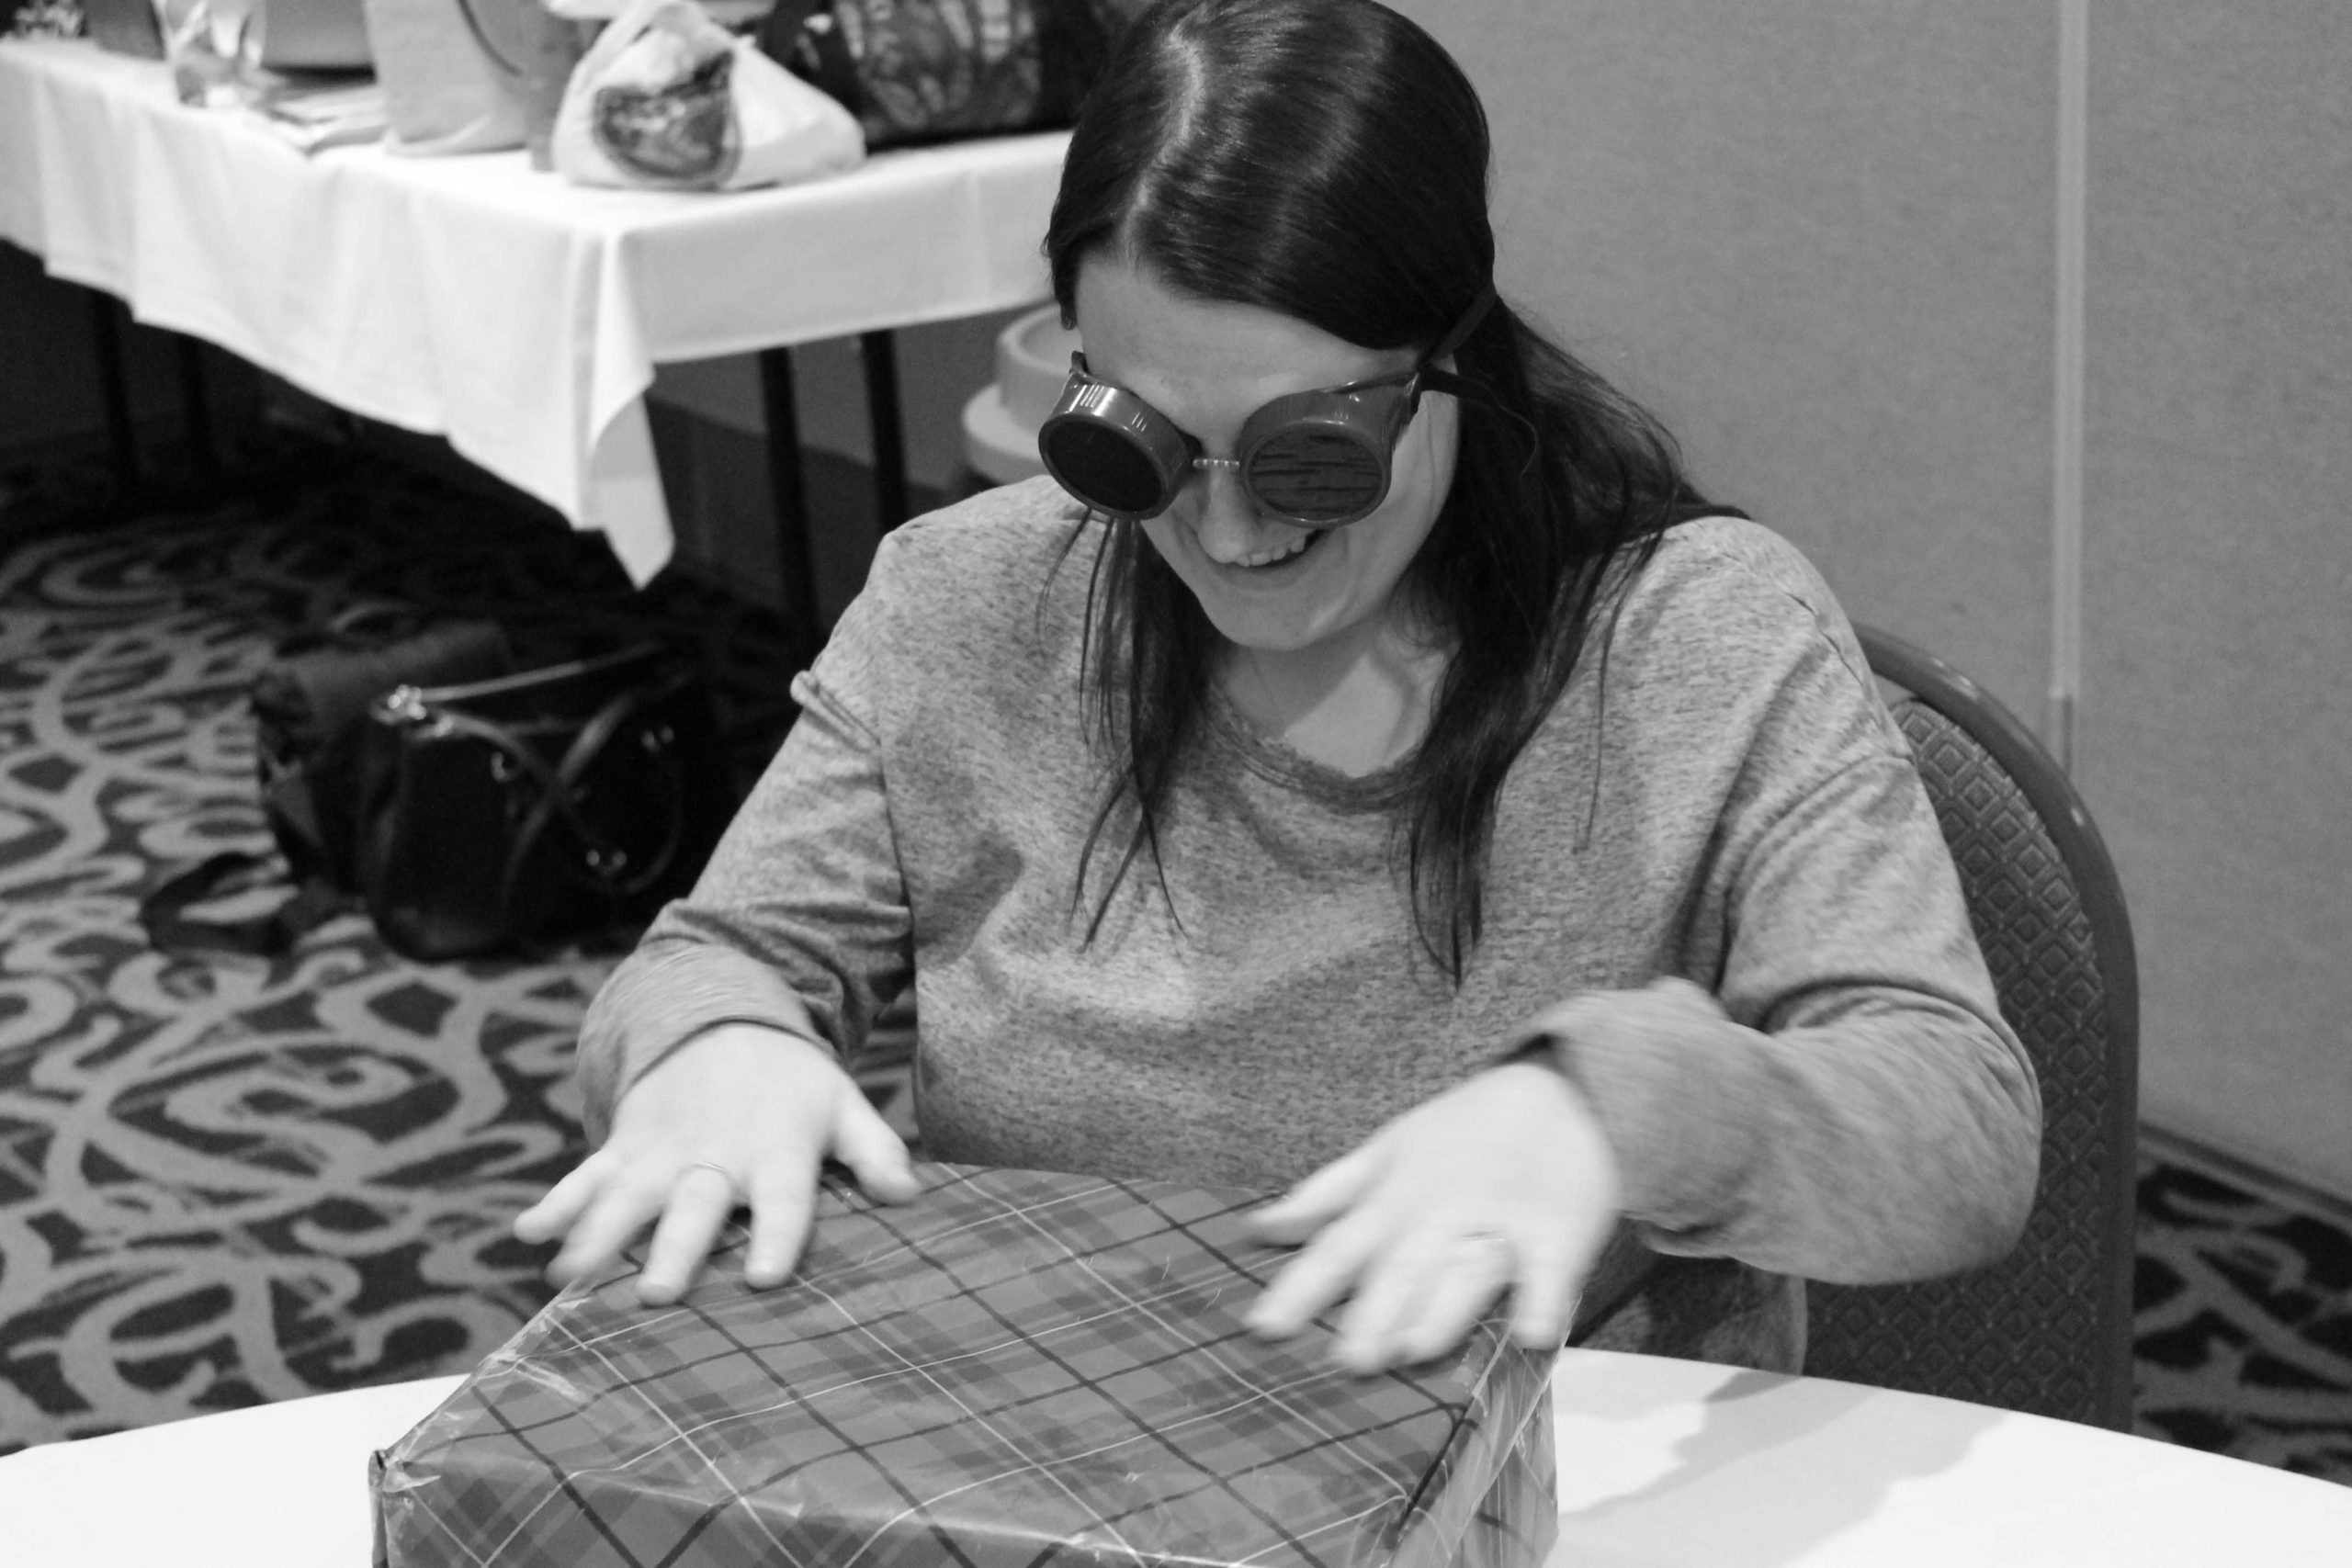 A black and white photo of a woman sitting at a table participating in a simulation training exercise. She is wearing simulation goggles and feeling a square “gift” wrapped in patterned paper.